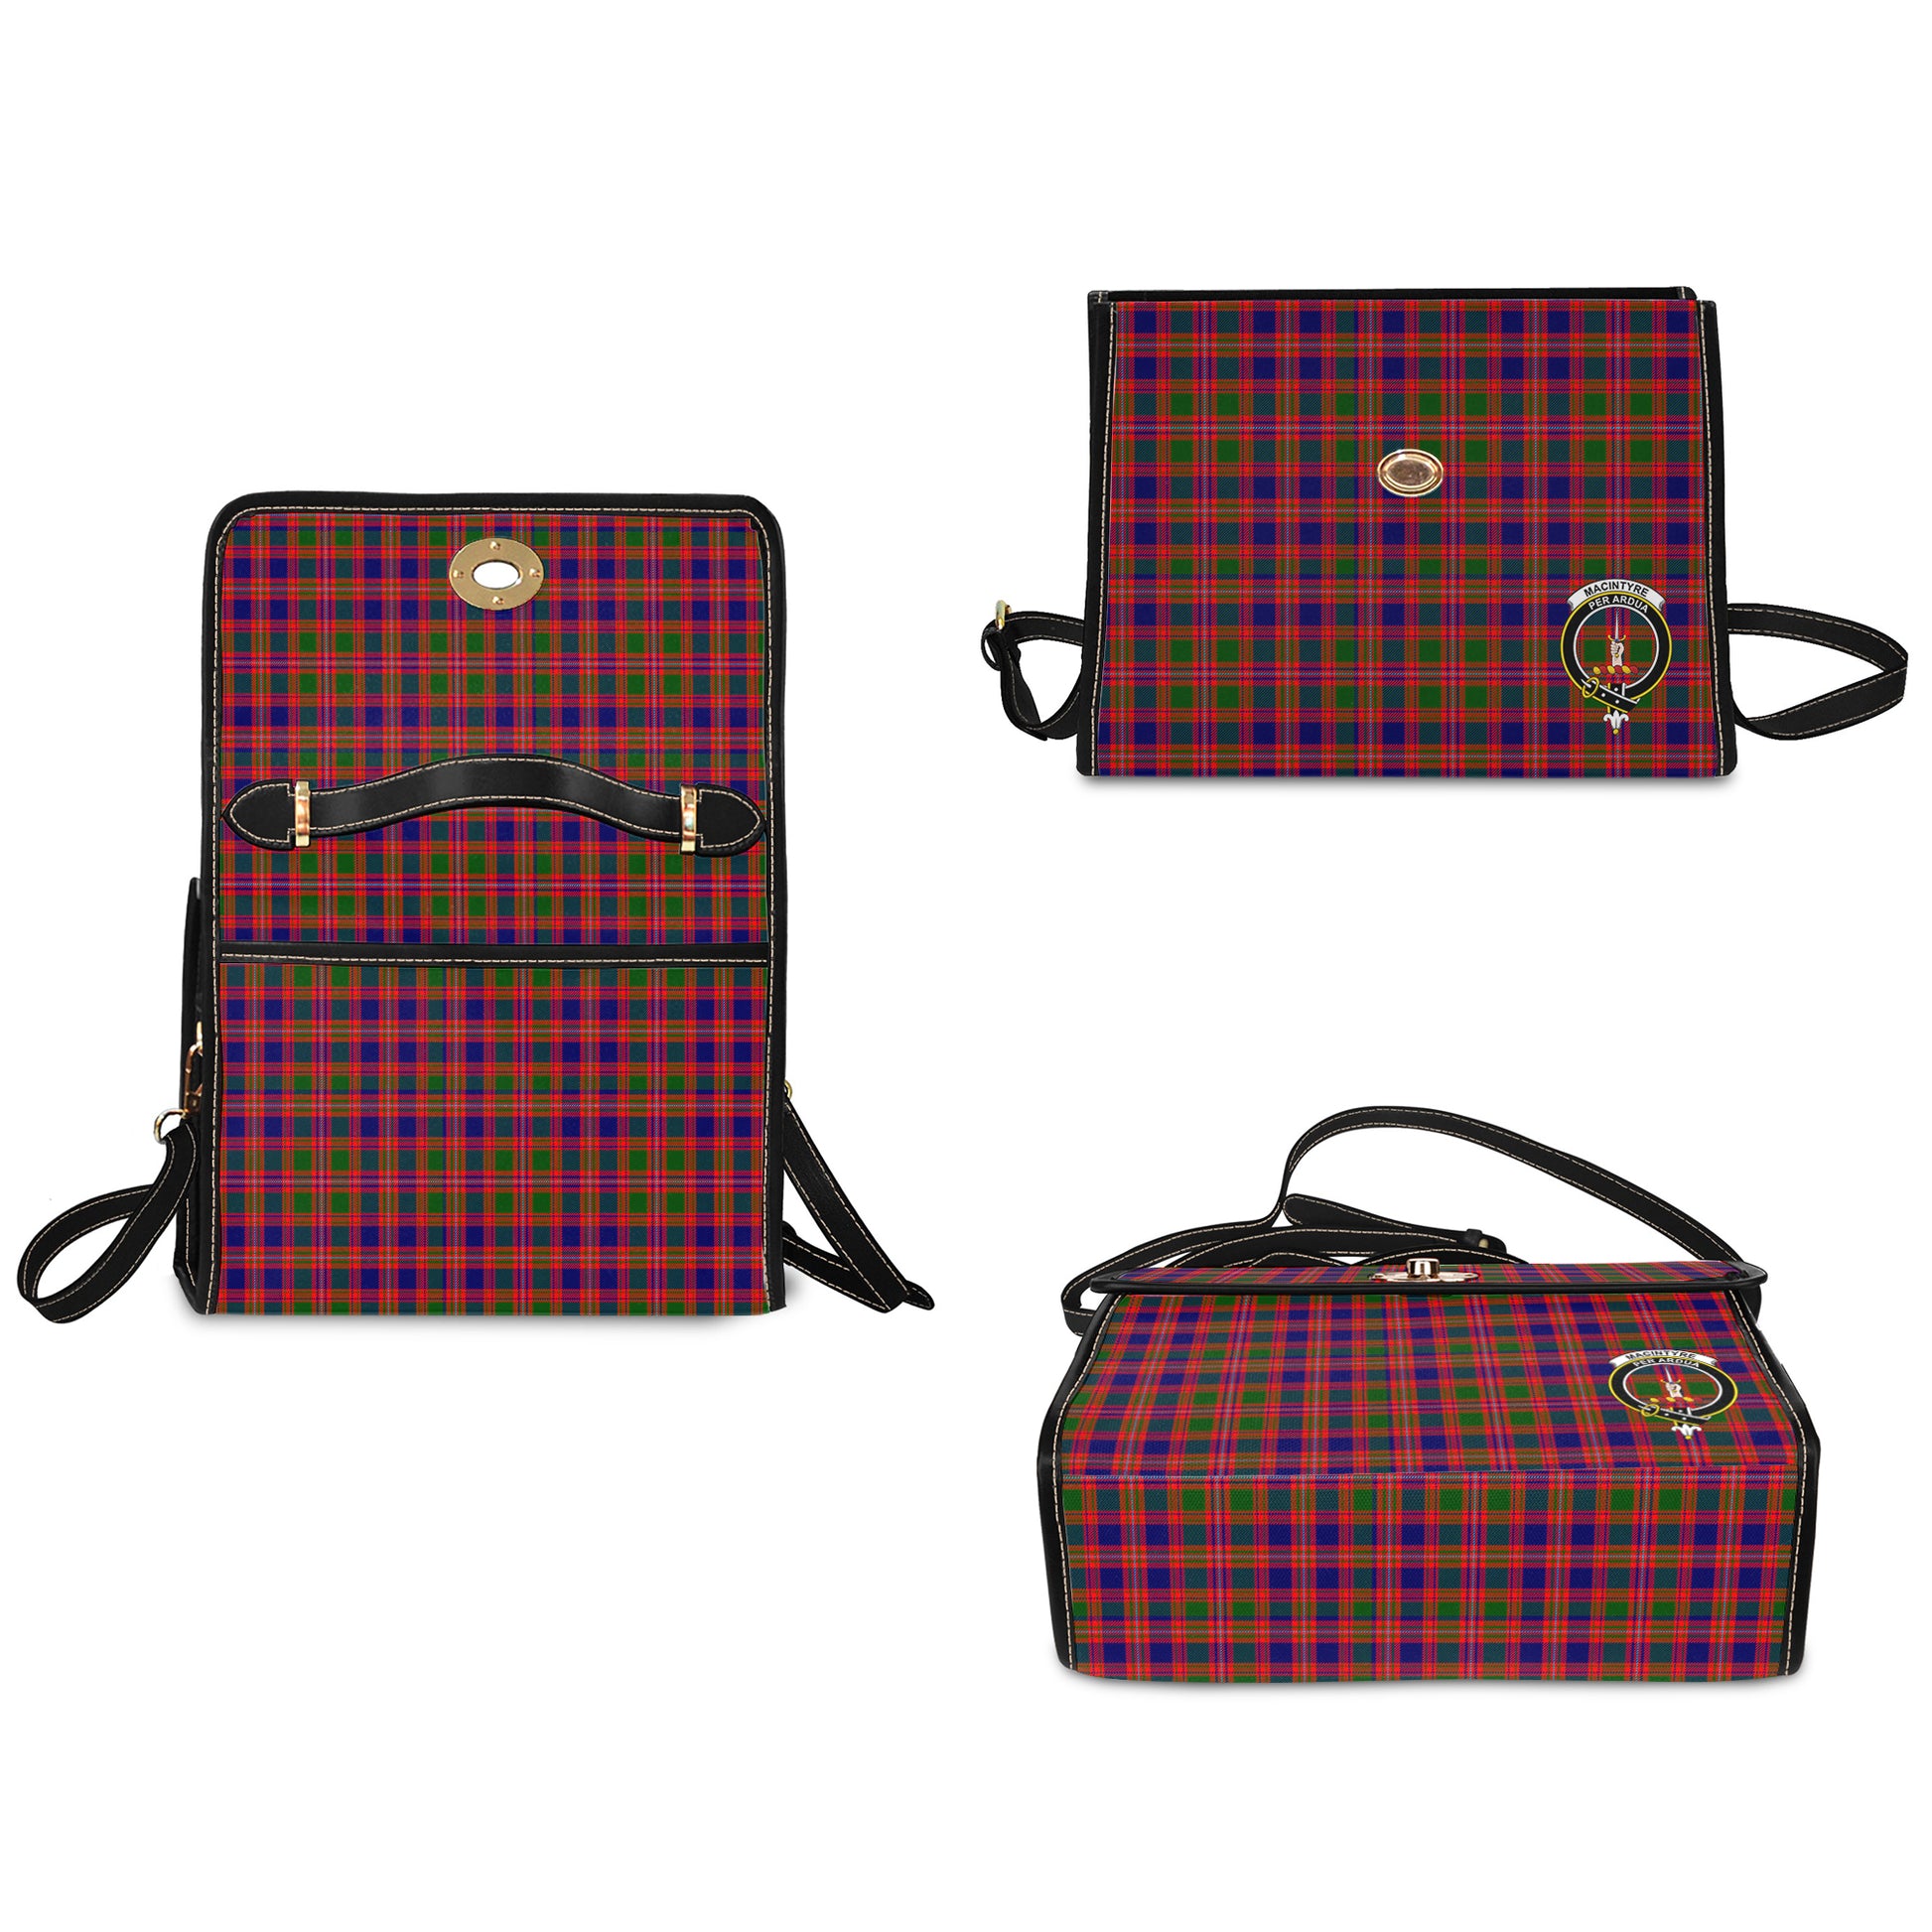 macintyre-modern-tartan-leather-strap-waterproof-canvas-bag-with-family-crest